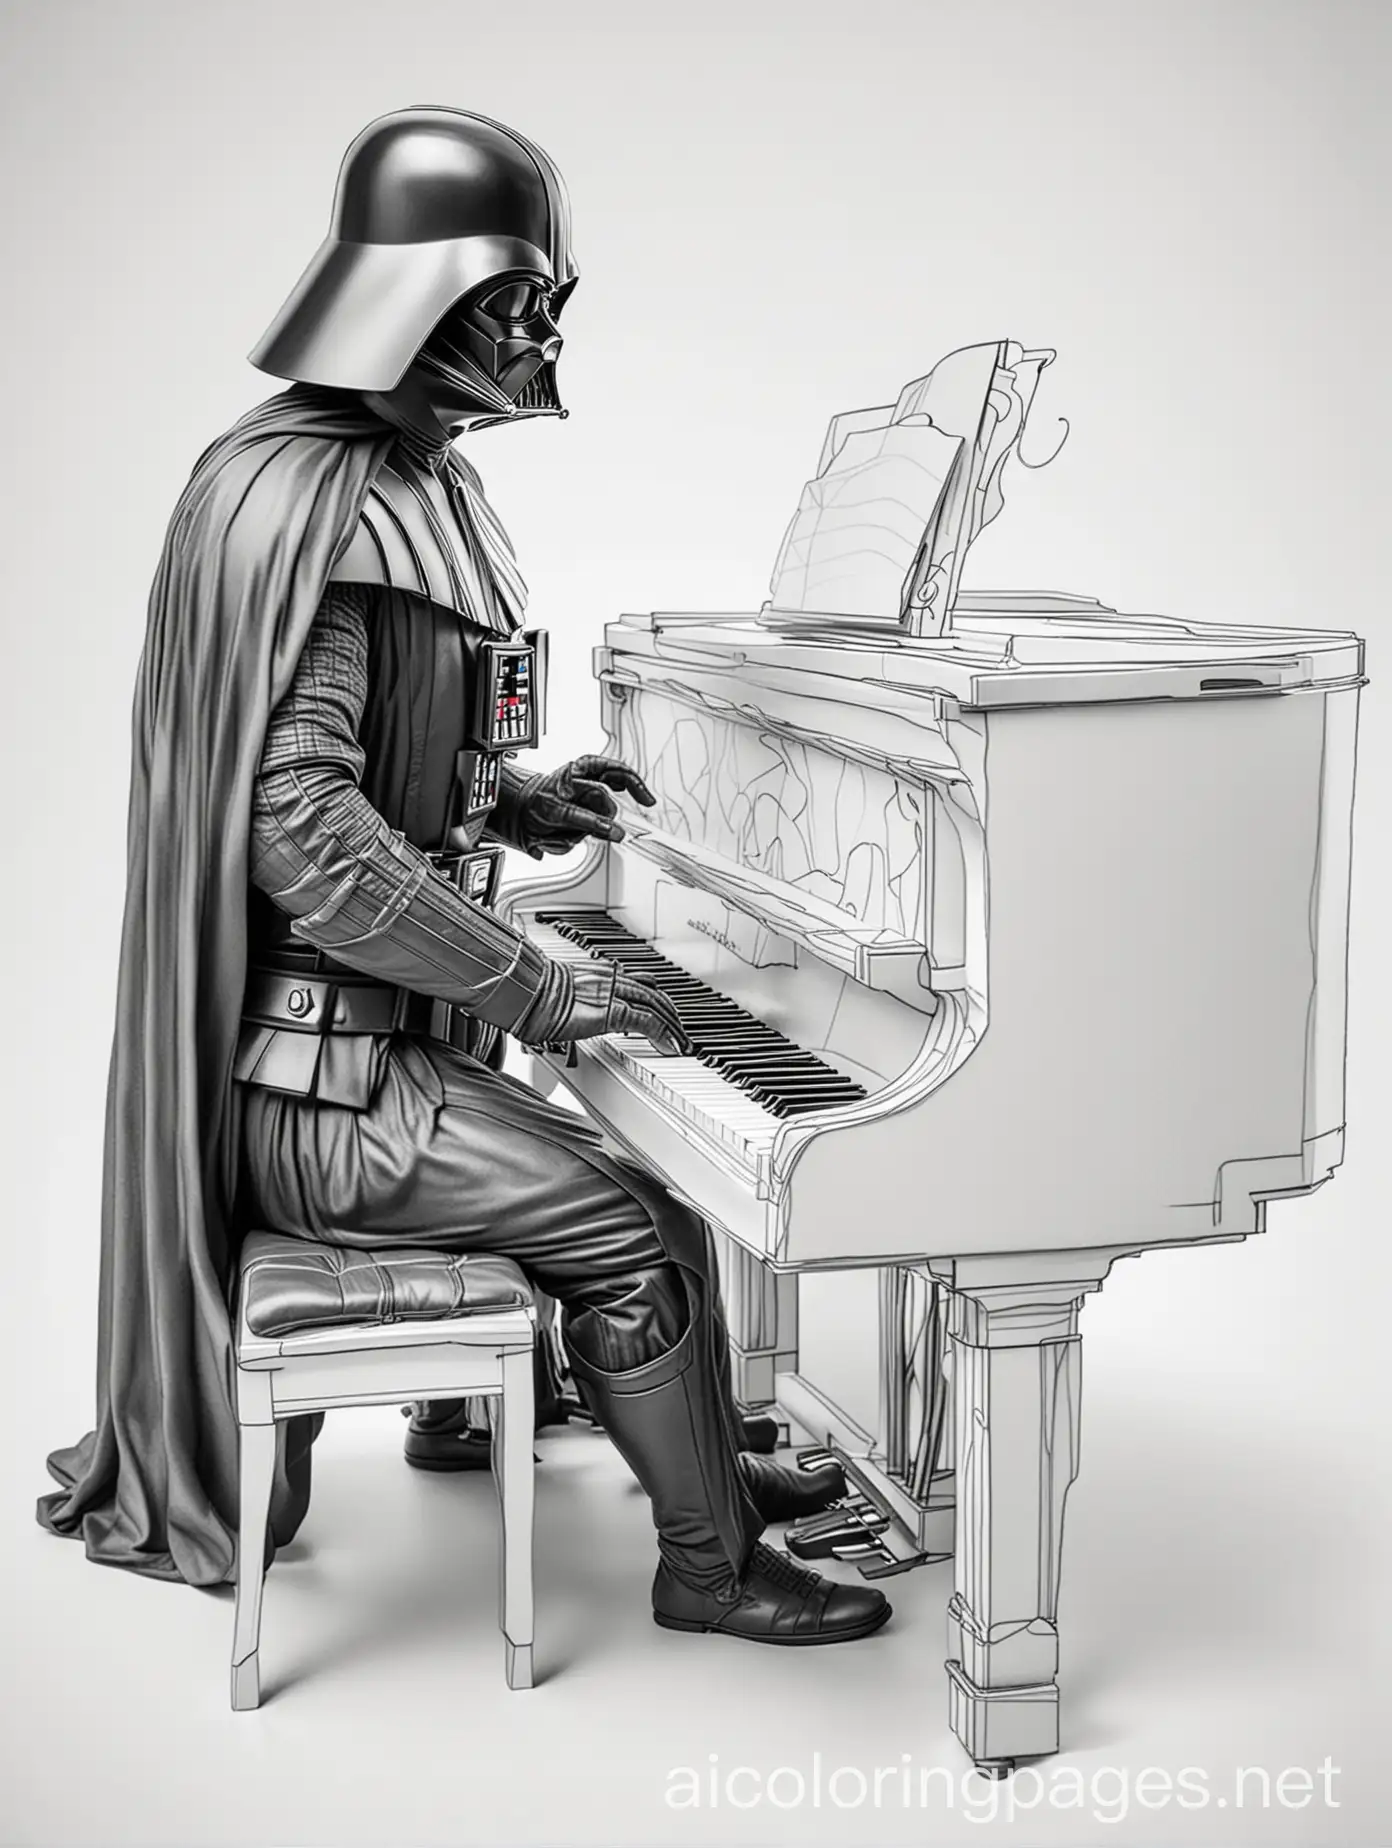 Darth vader playing a piano , Coloring Page, black and white, line art, white background, Simplicity, Ample White Space. The background of the coloring page is plain white to make it easy for young children to color within the lines. The outlines of all the subjects are easy to distinguish, making it simple for kids to color without too much difficulty